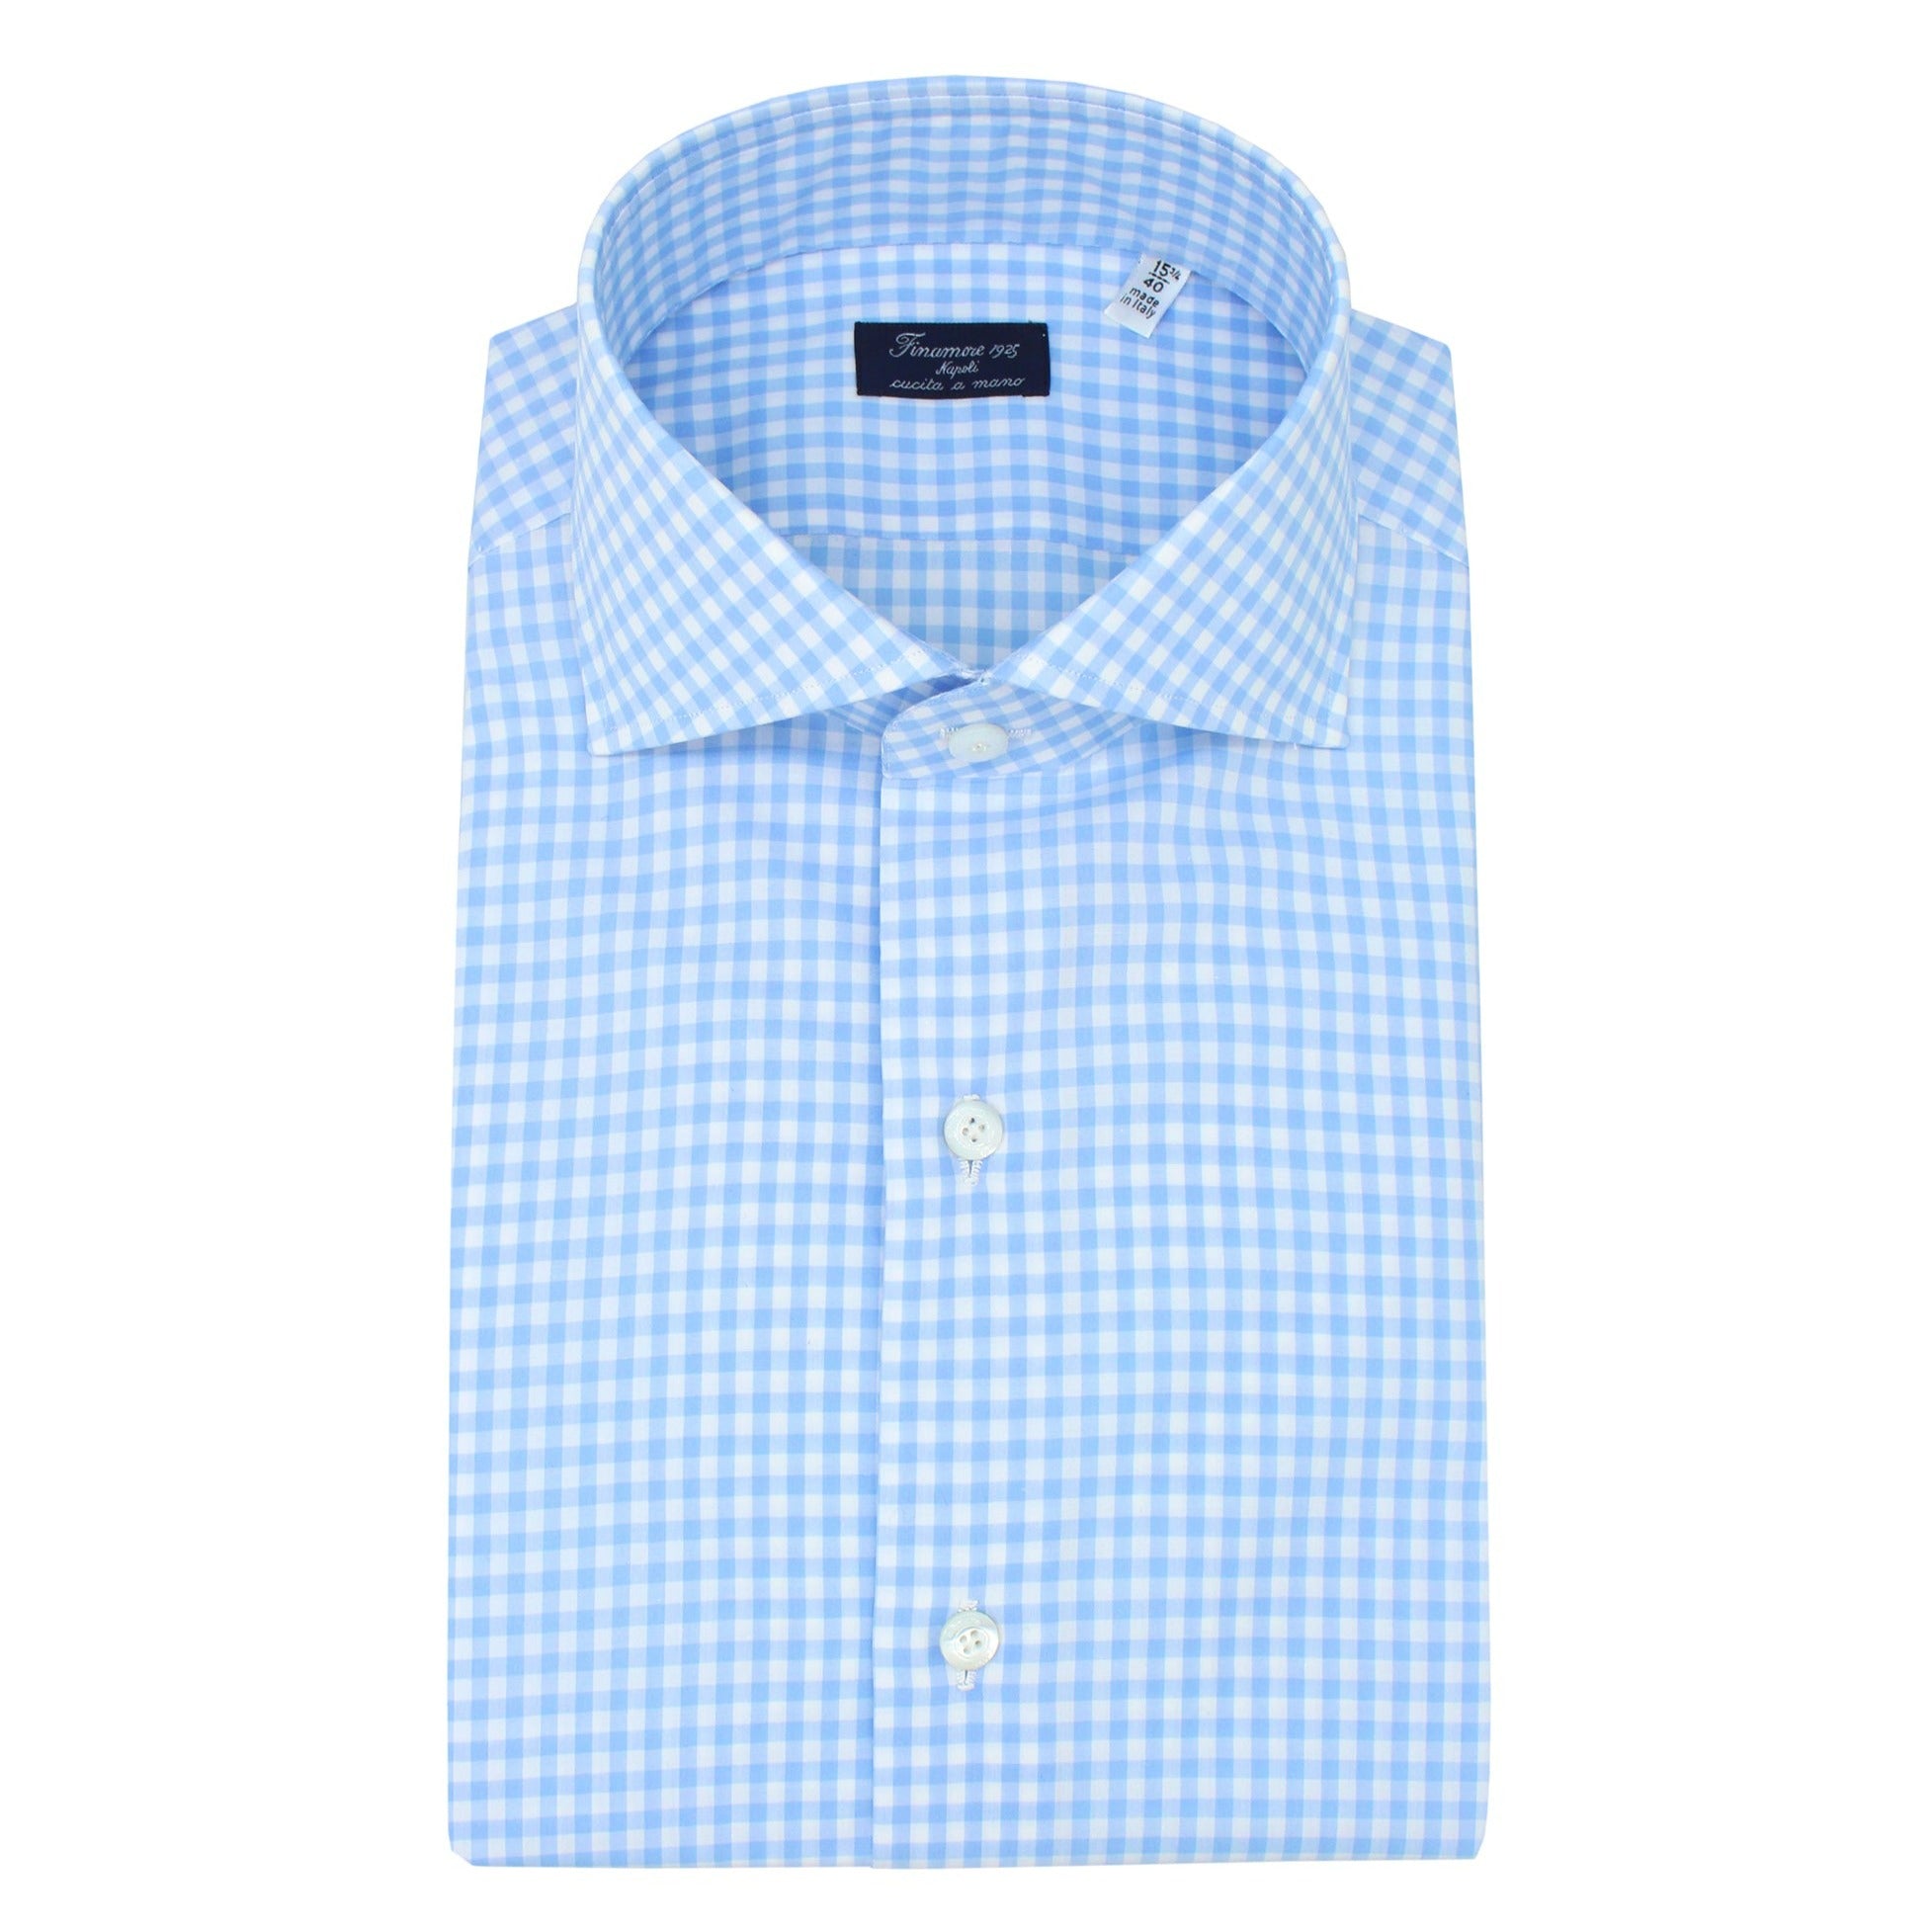 Classic Naples shirt in light blue checked cotton